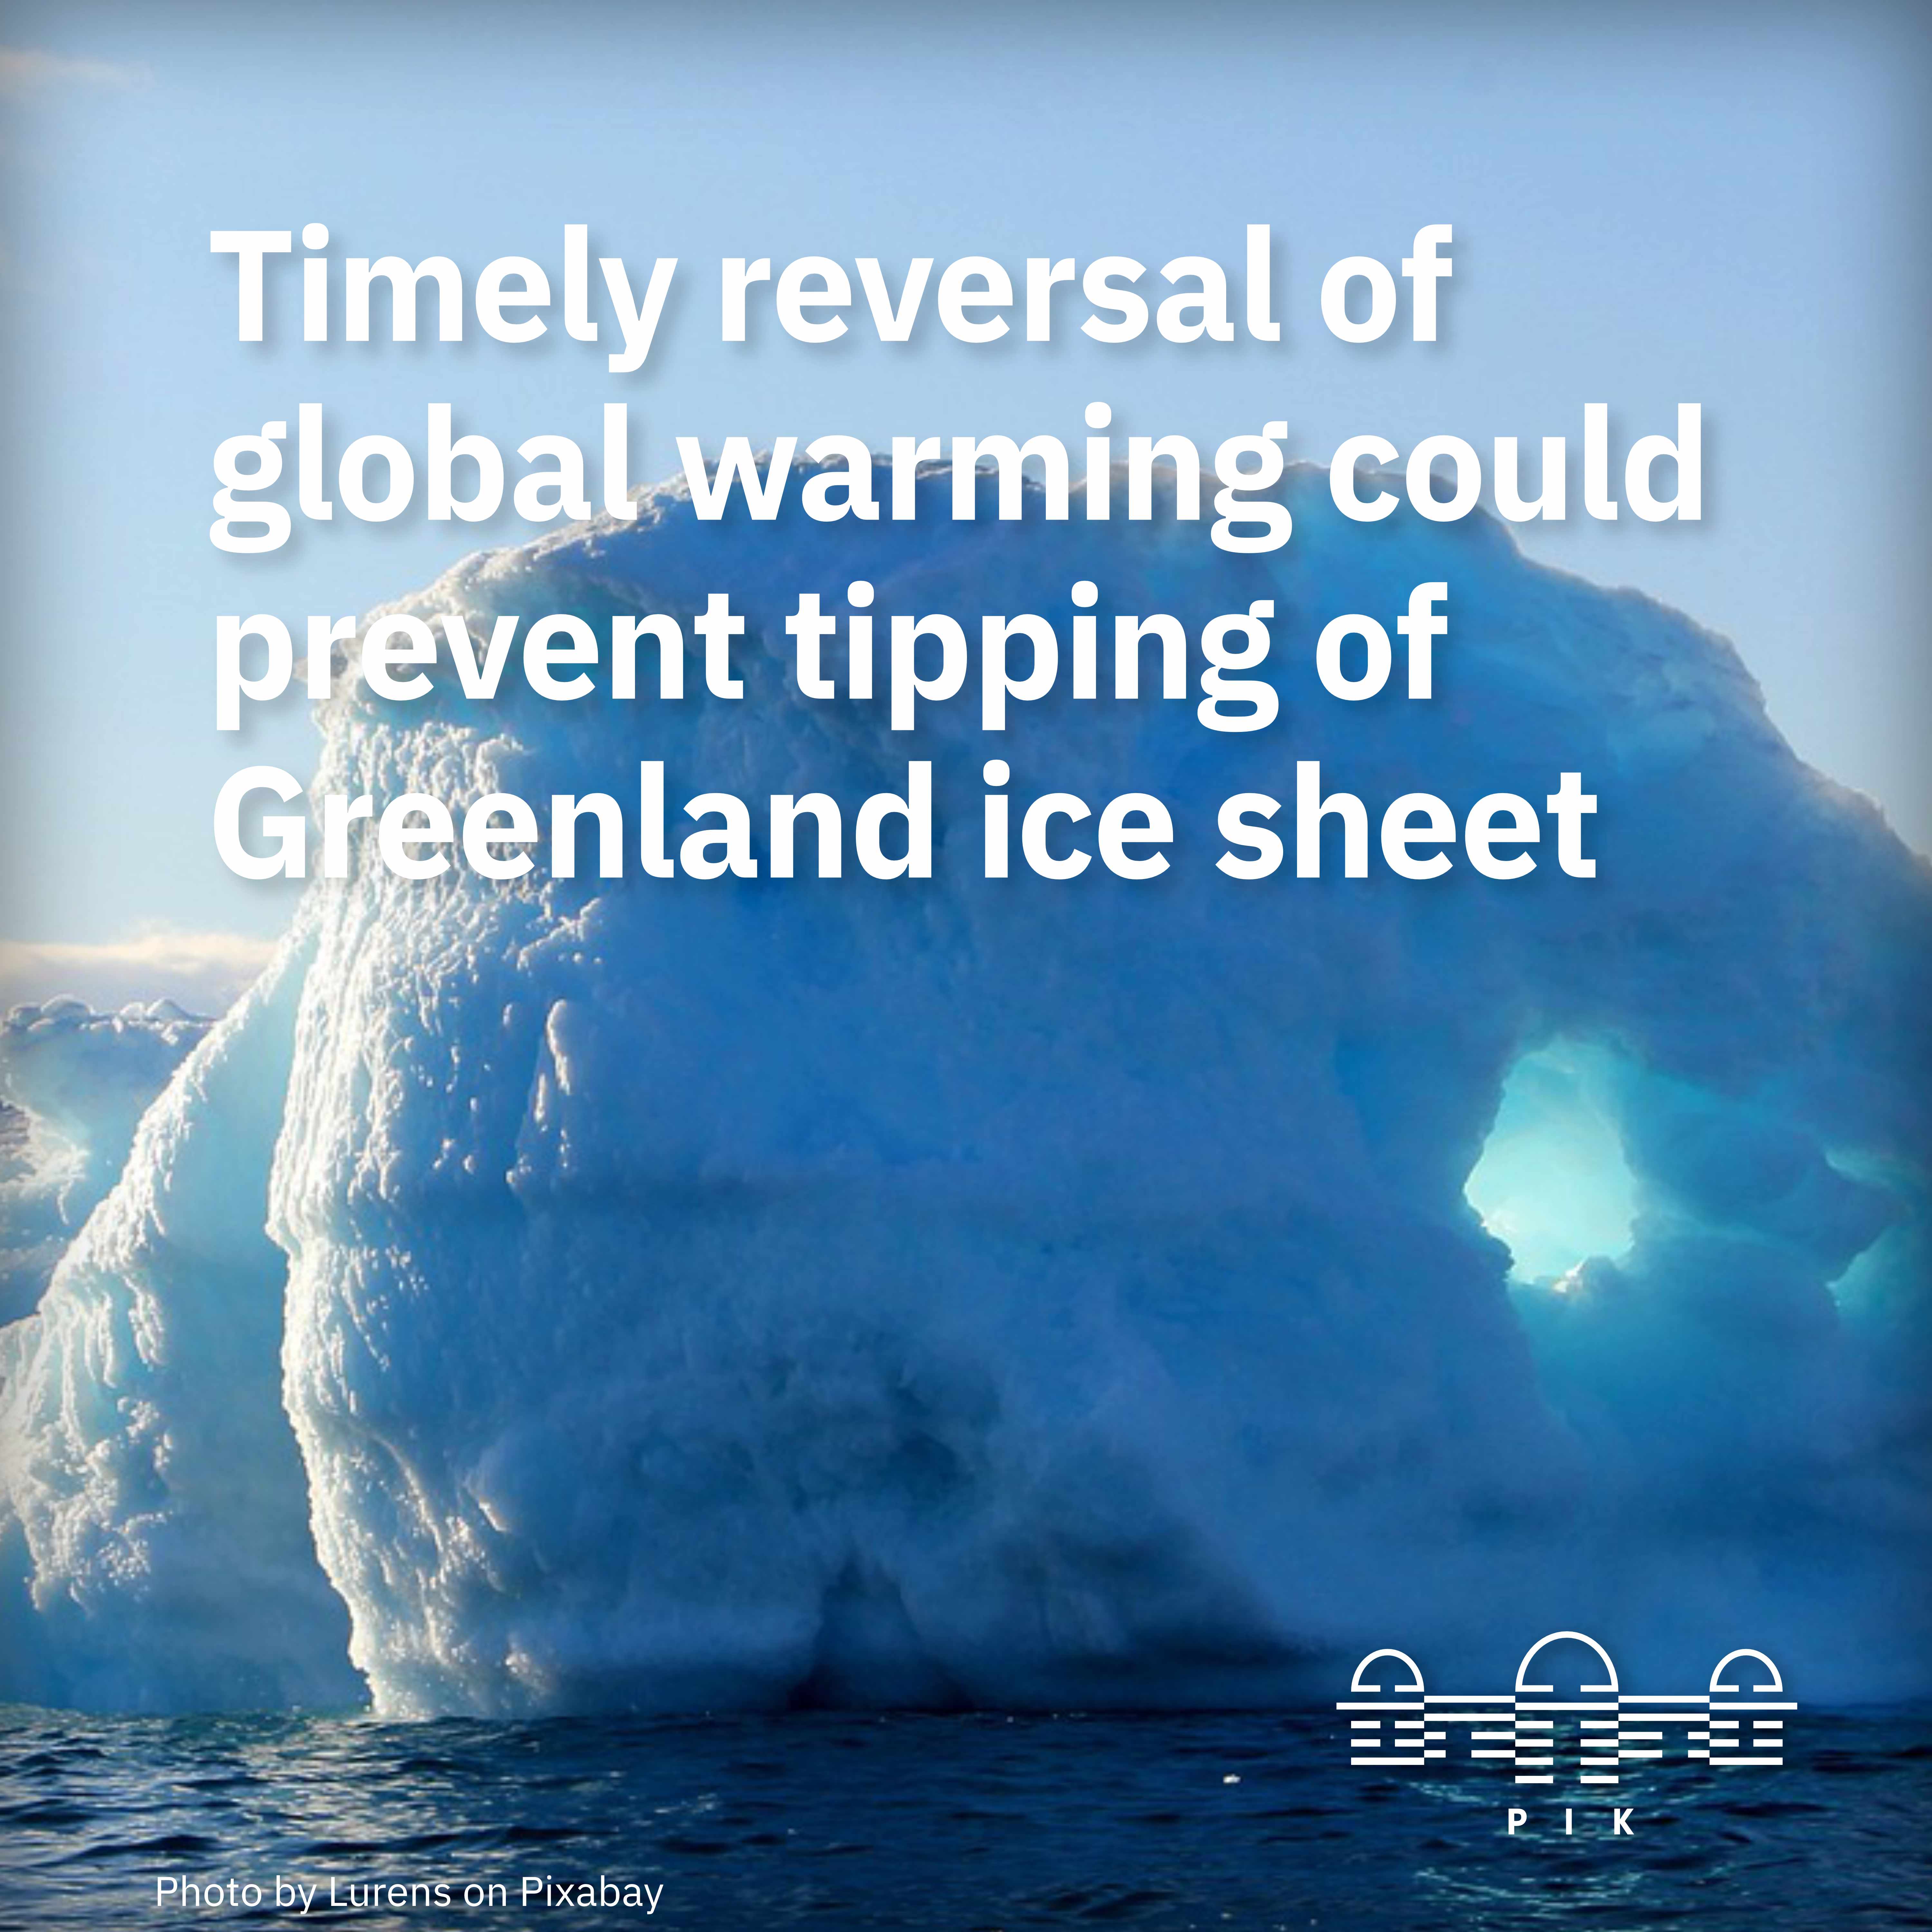 Preventing the Greenland ice sheet from tipping